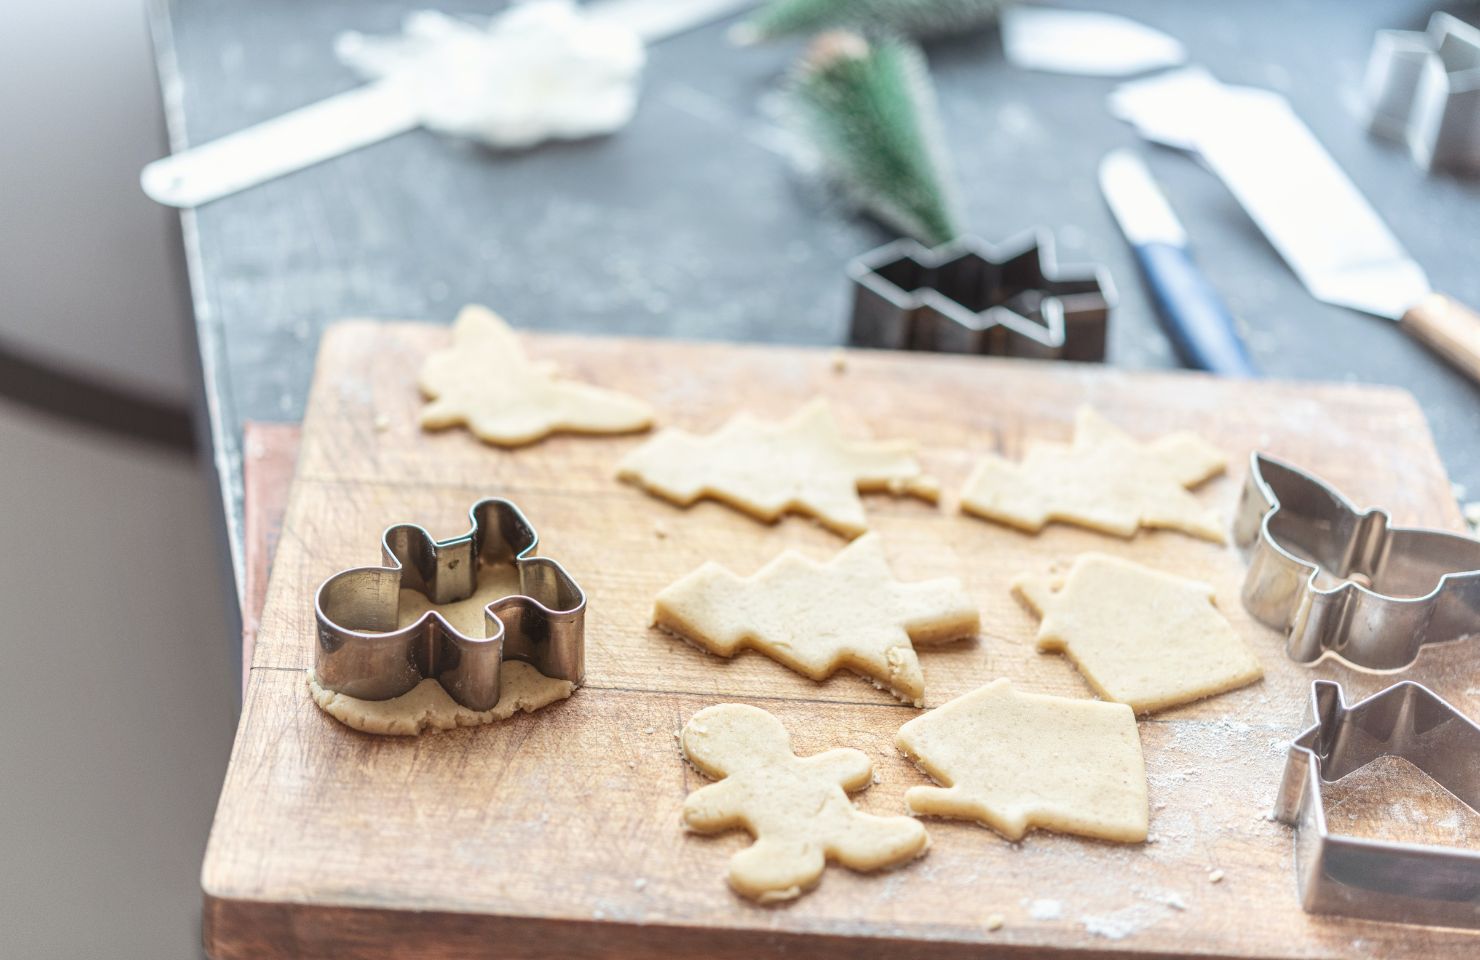 Christmas in germany: it's a German christmas tradition to bake cookies